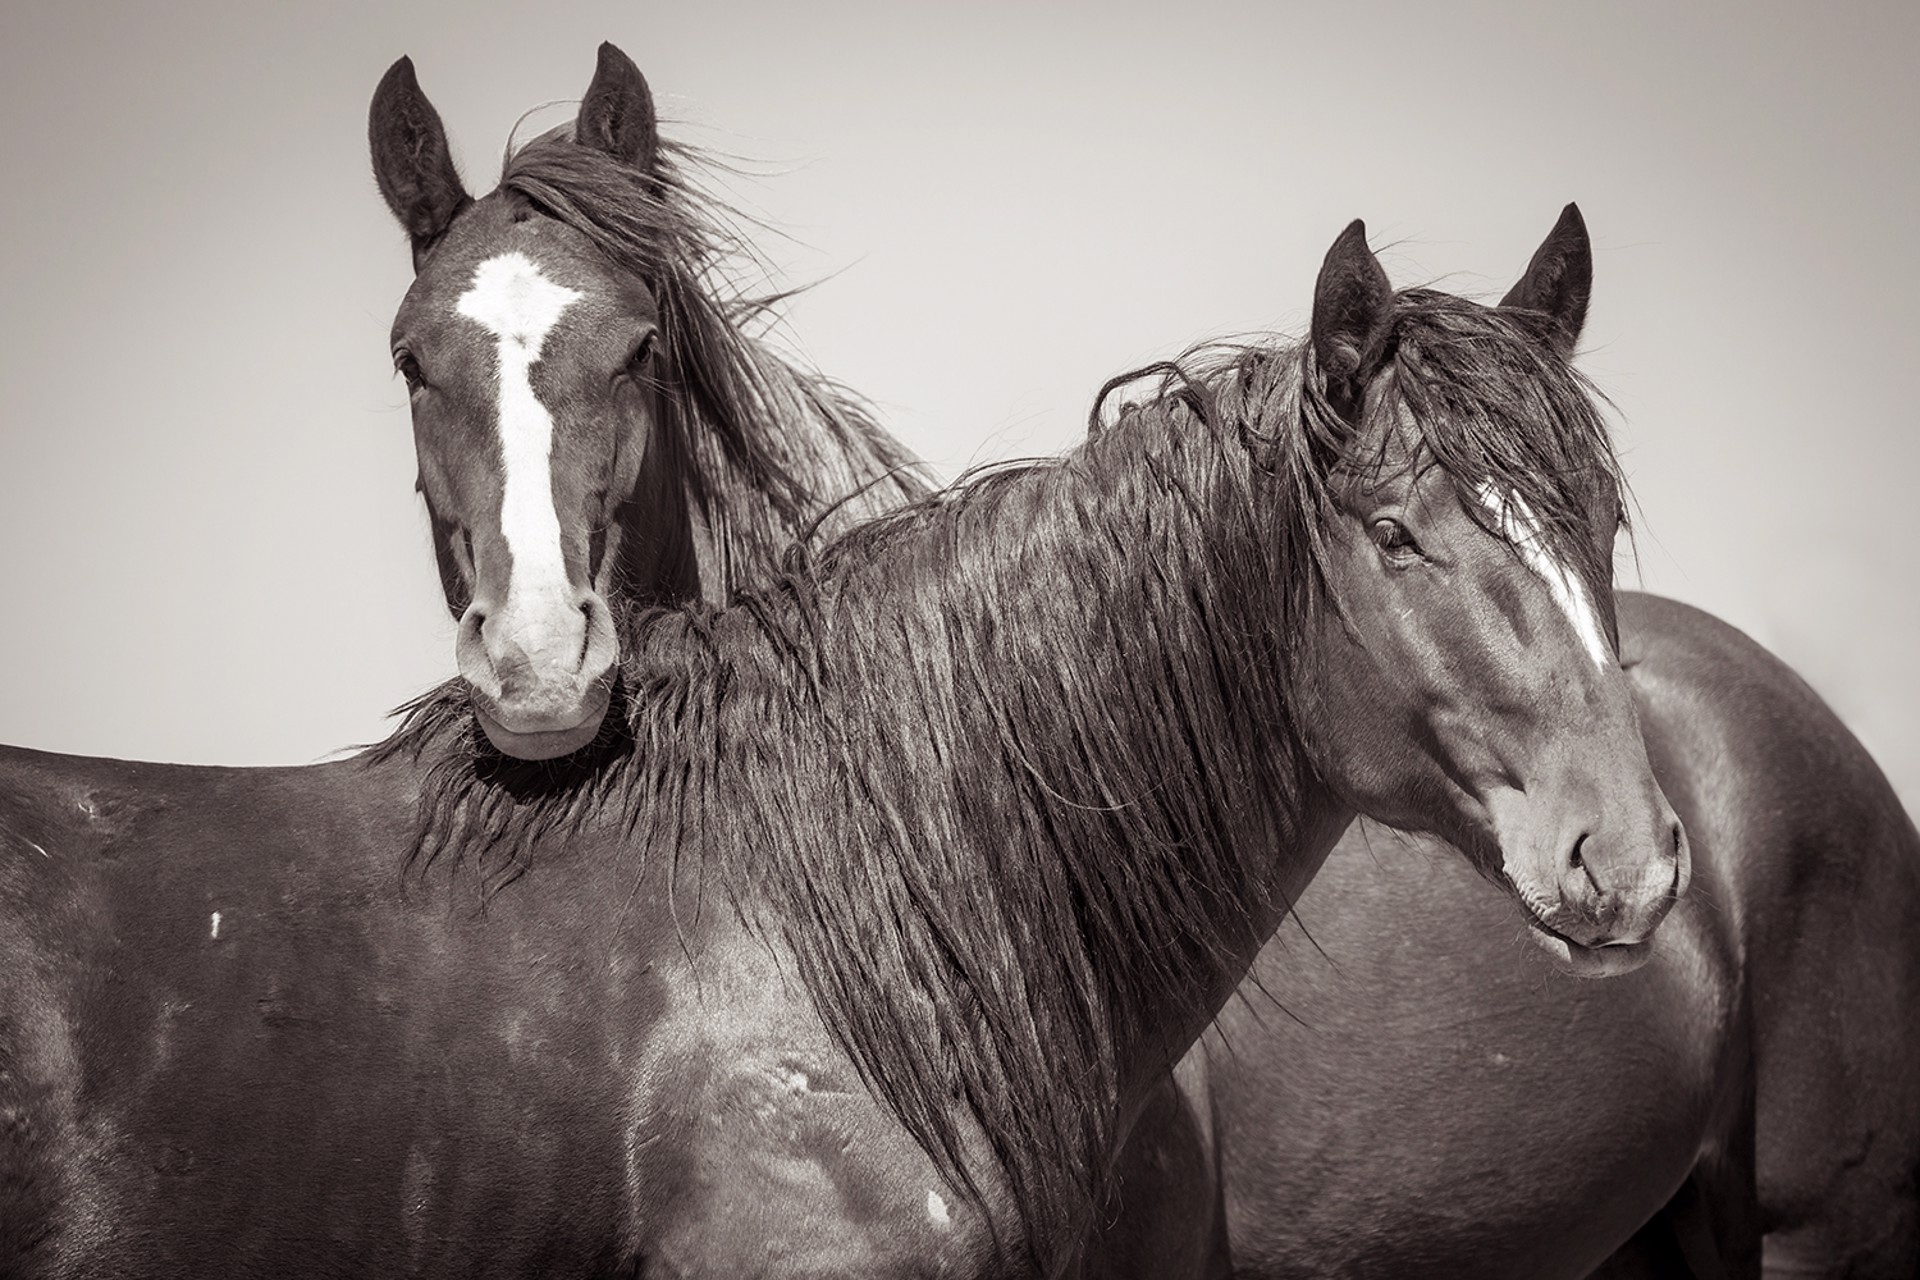 Black And White Photograph Featuring Two Dark Horses Embraced Looking At Camera